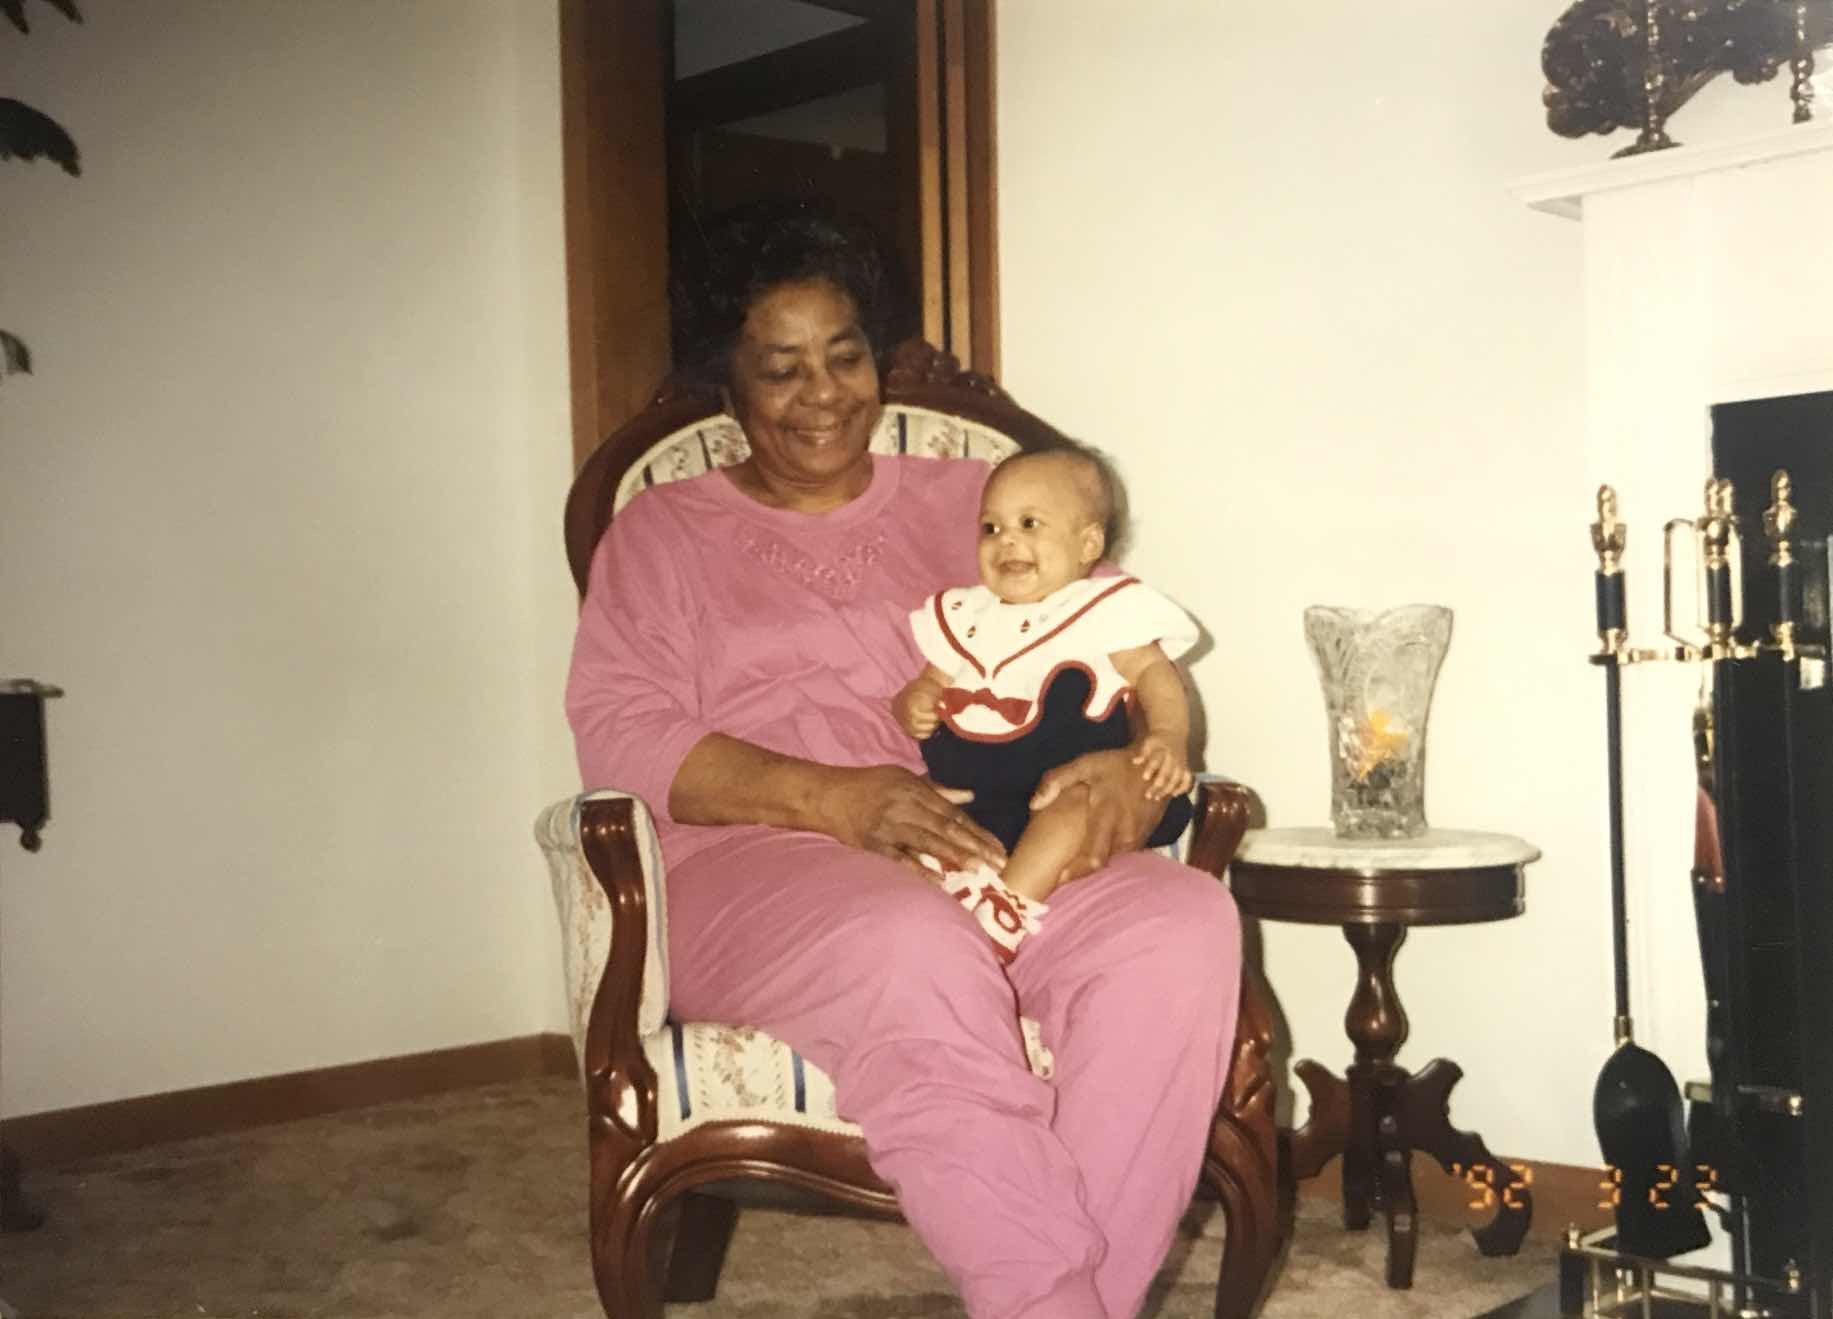 old photograph of a Black grandmother in a pink lounge set holding her infant grandchild. They are both smiling.